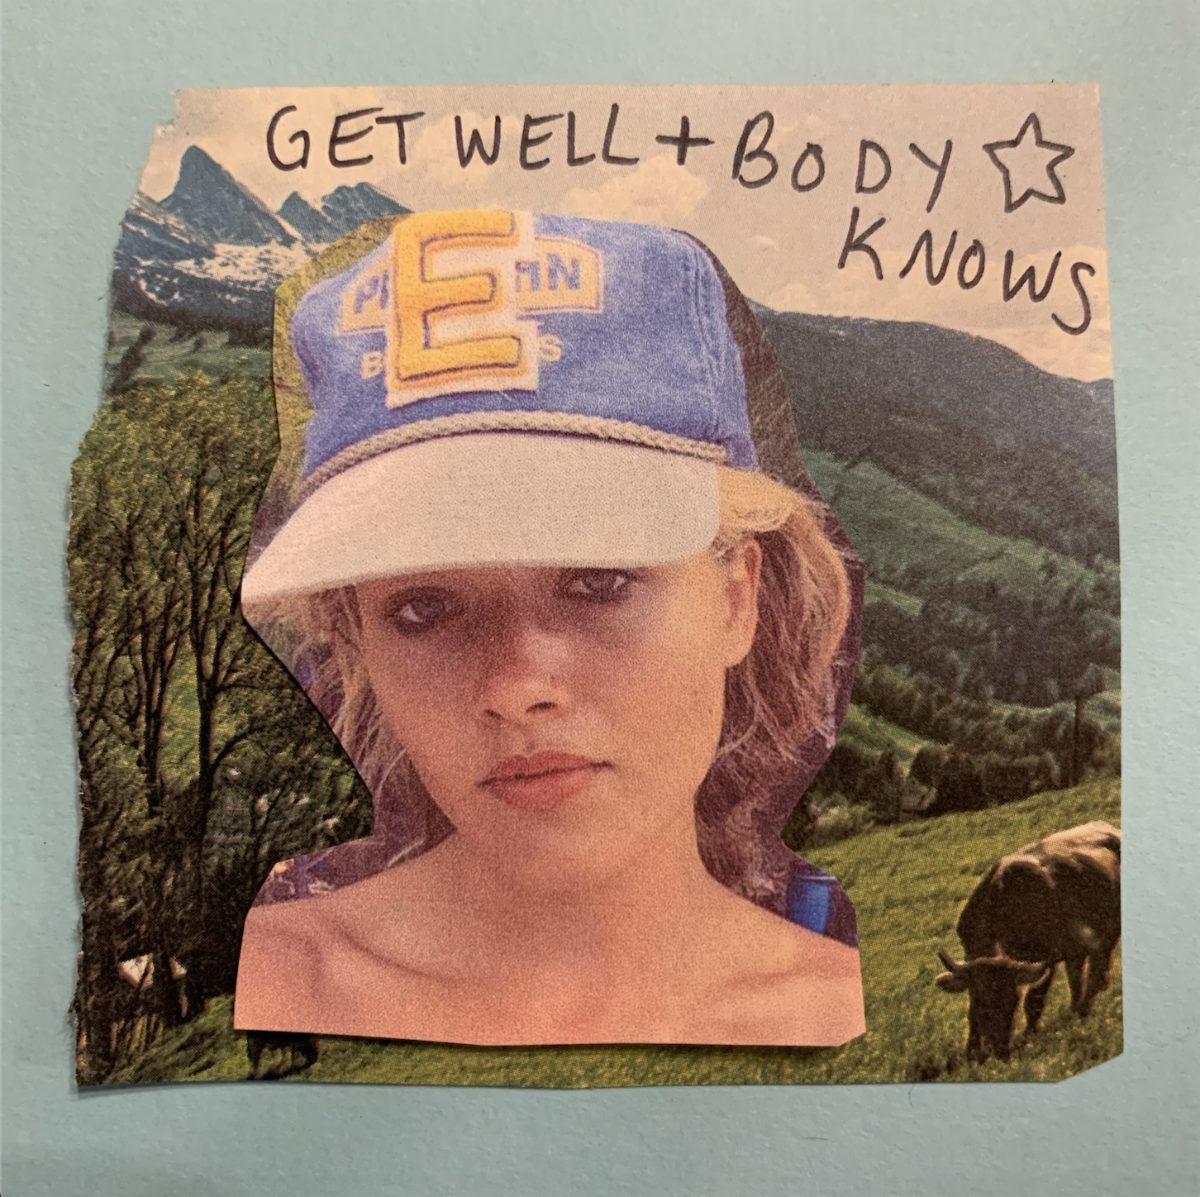 Elissa Mielke Shares Two New Singles, “Get Well” And “Body Knows”, Yours Truly, News, June 9, 2023